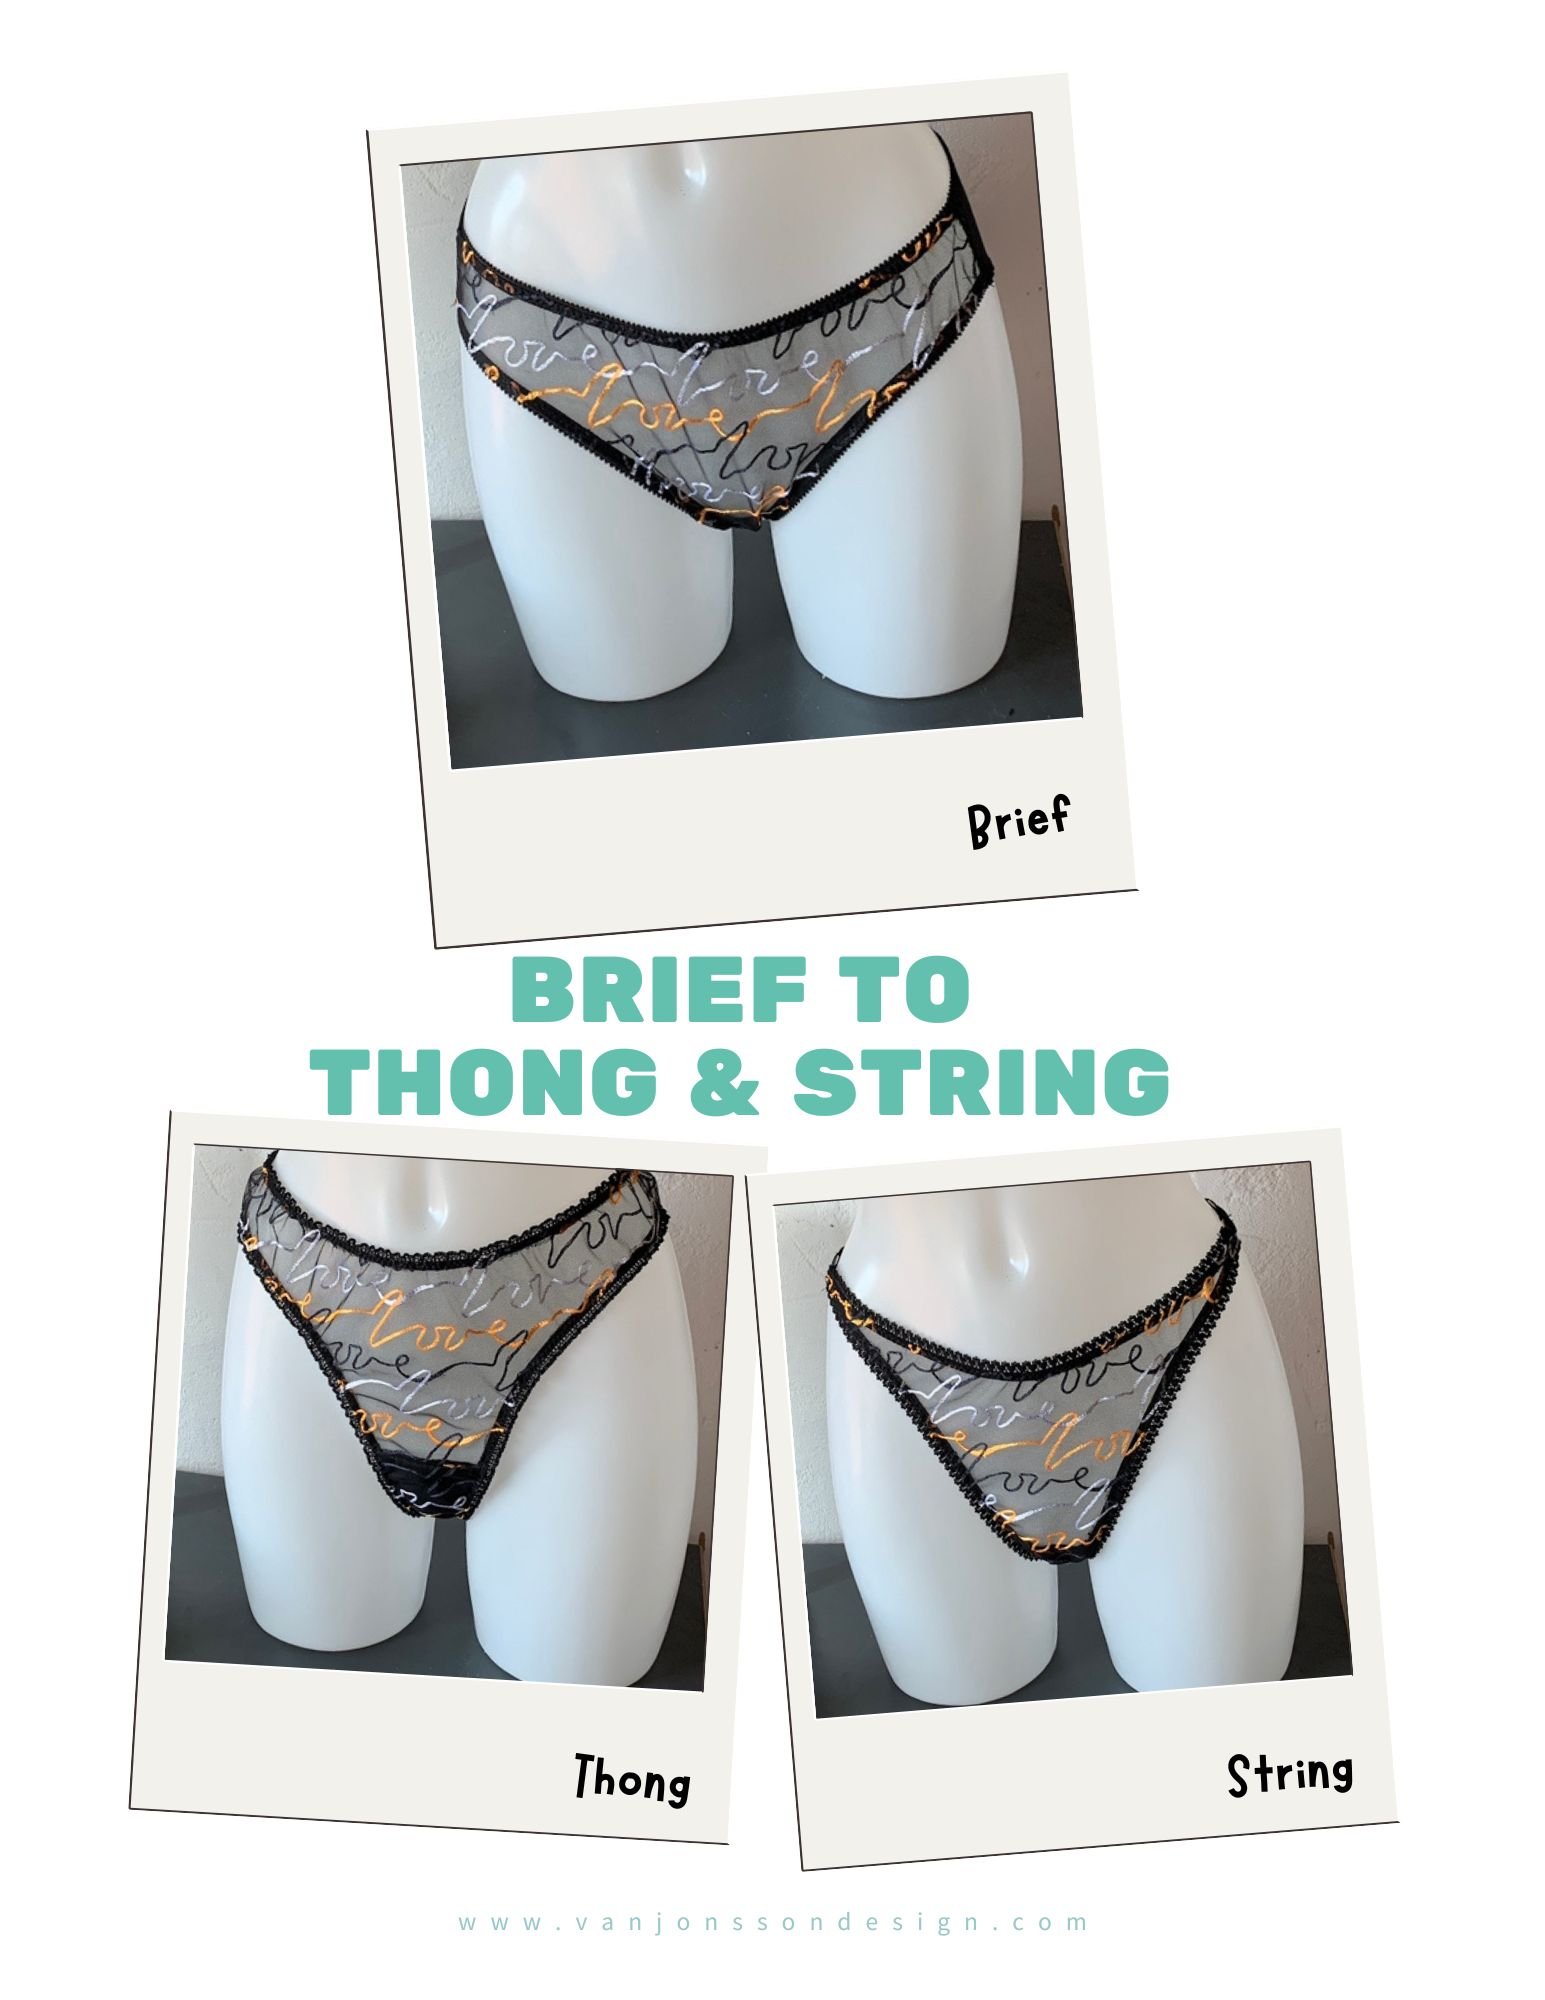 How to change a brief pattern to a thong or G-string pattern — Van